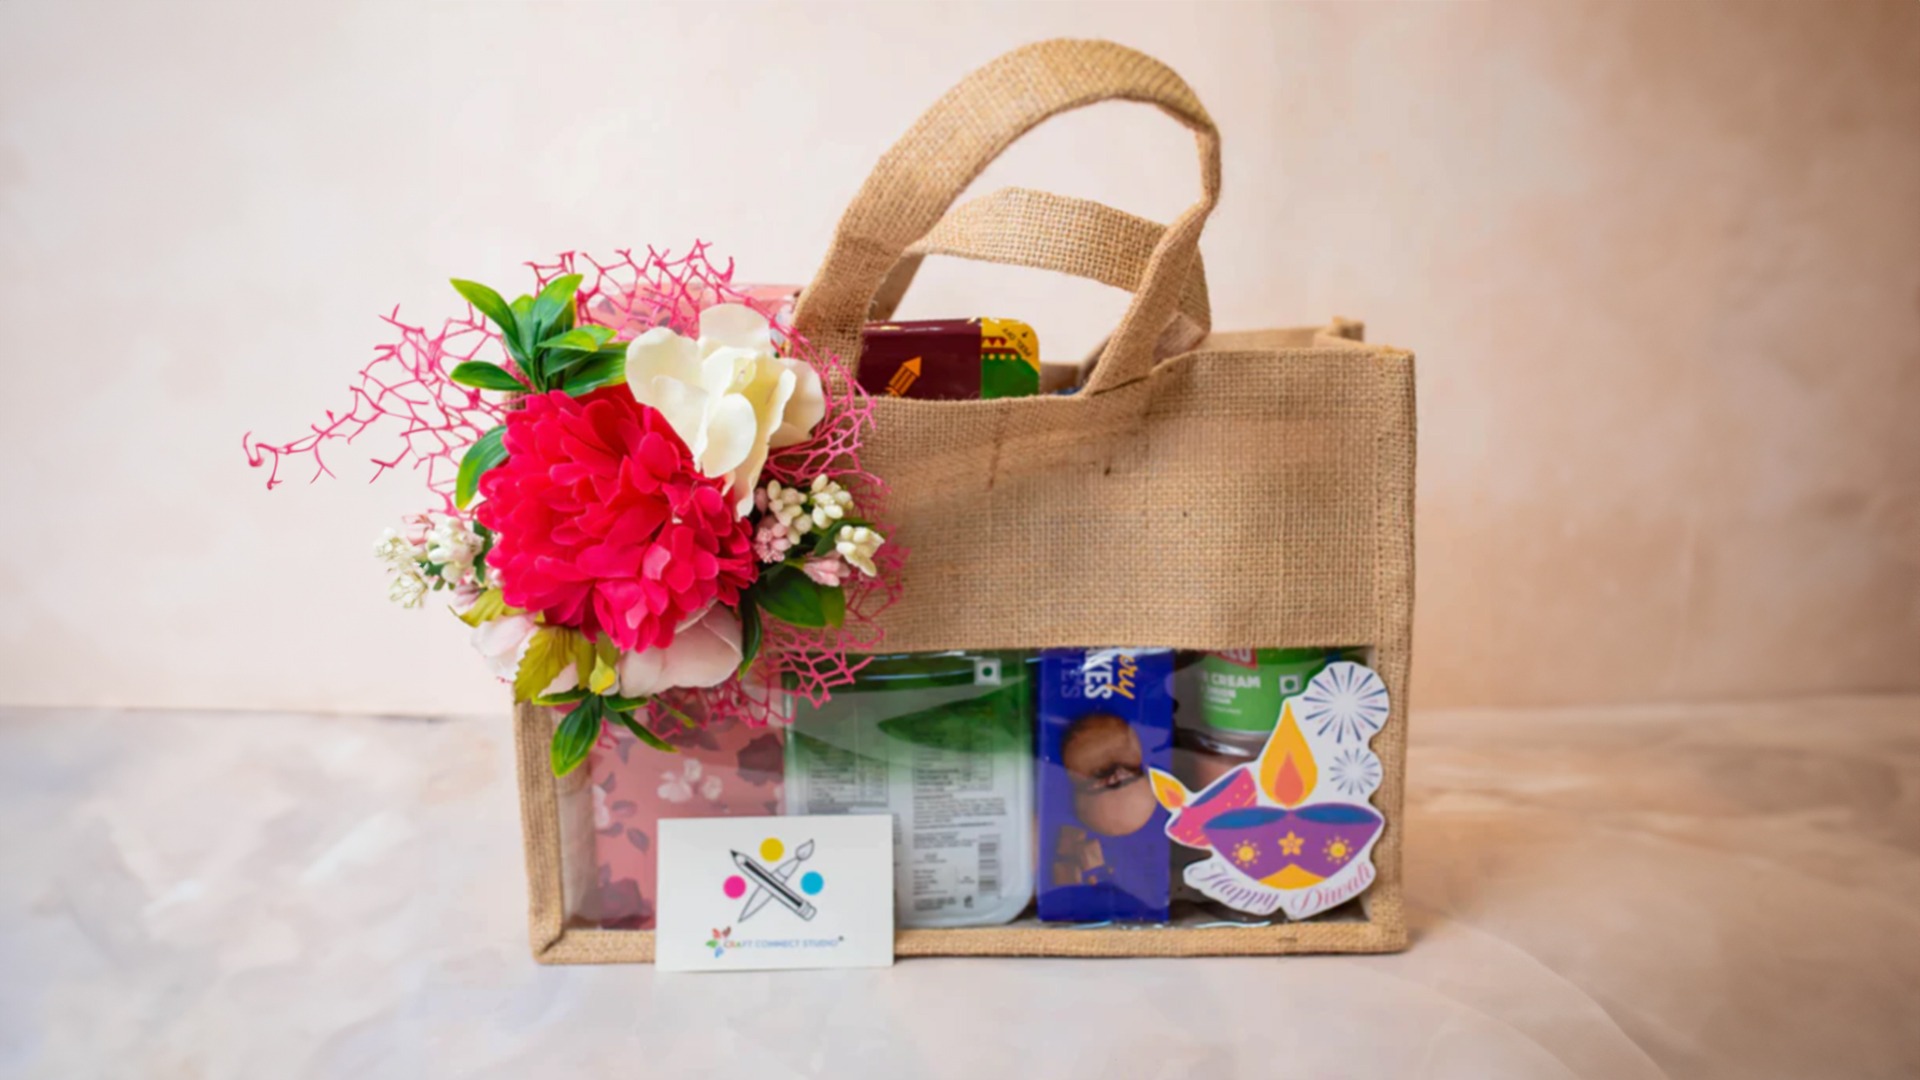 Why Giving Corporate Gift Hampers Is Great for Team Cohesion